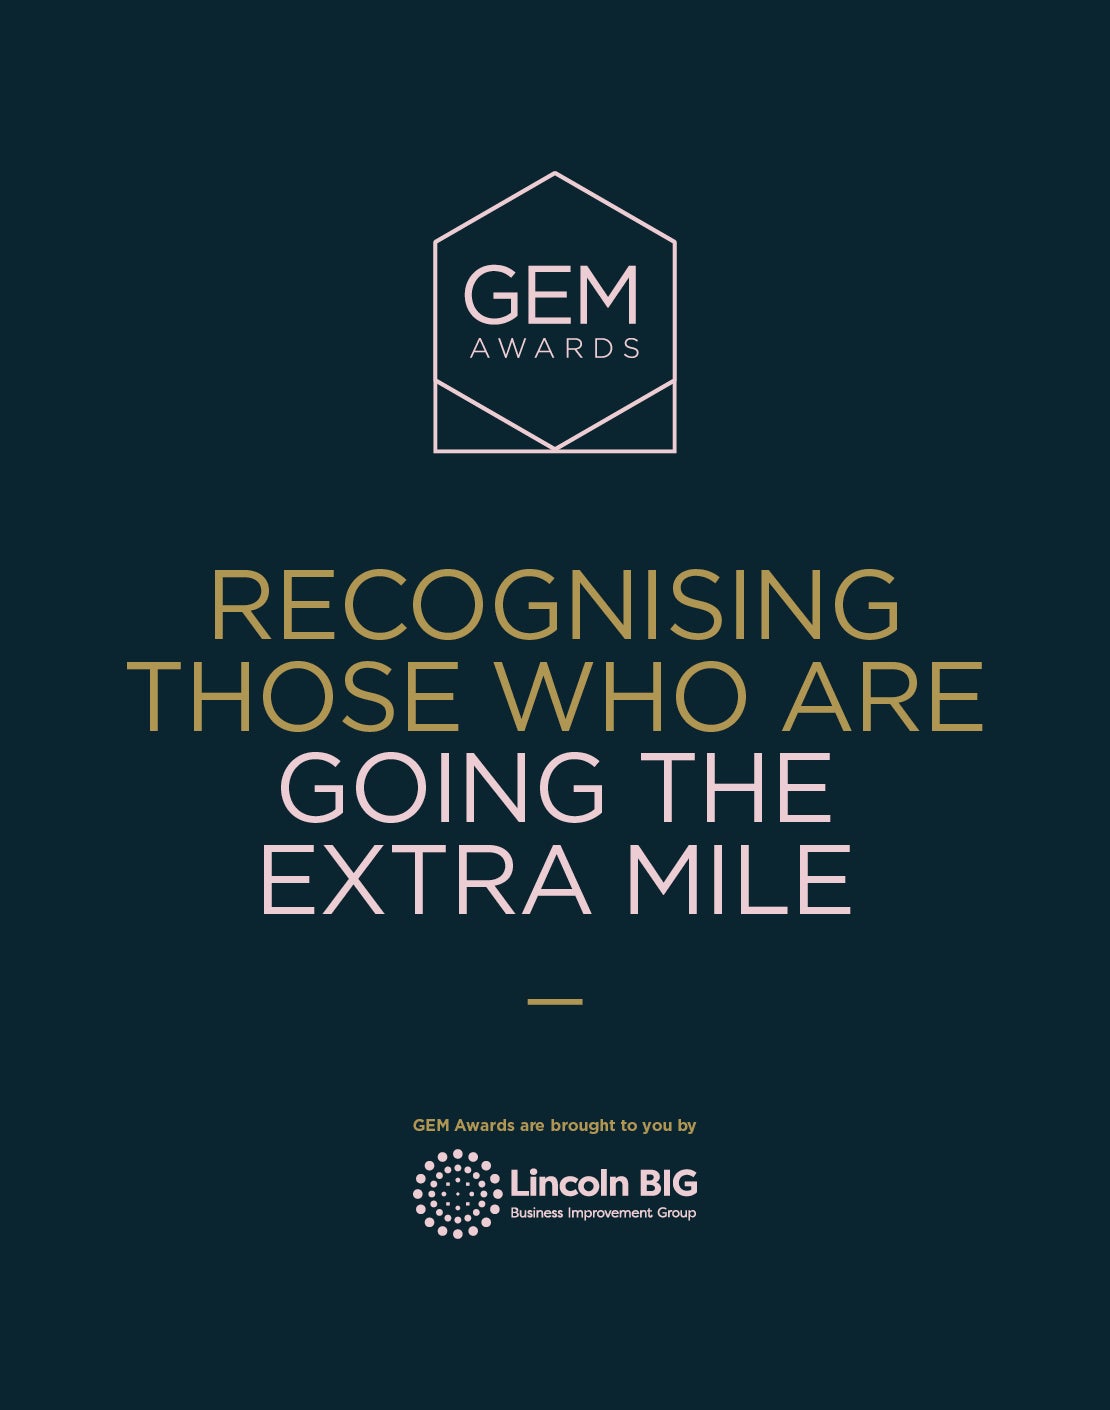 GEM Awards Recognising those who are going the extra mile